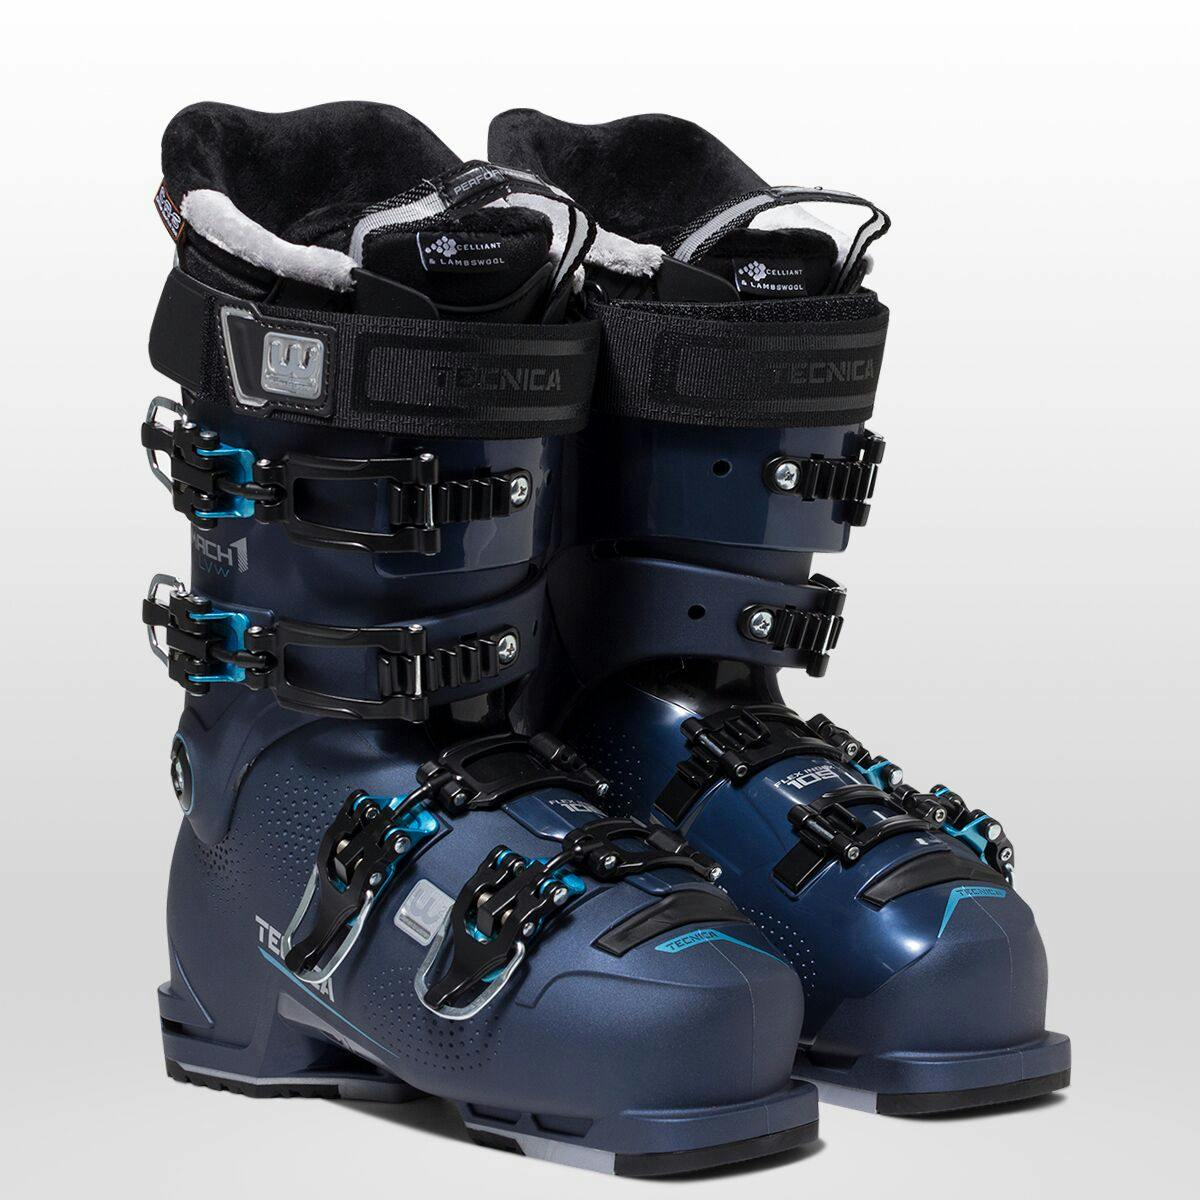 Tecnica Cochise 105 Women's Ski Boots Review: A Touring and Downhill Wonder